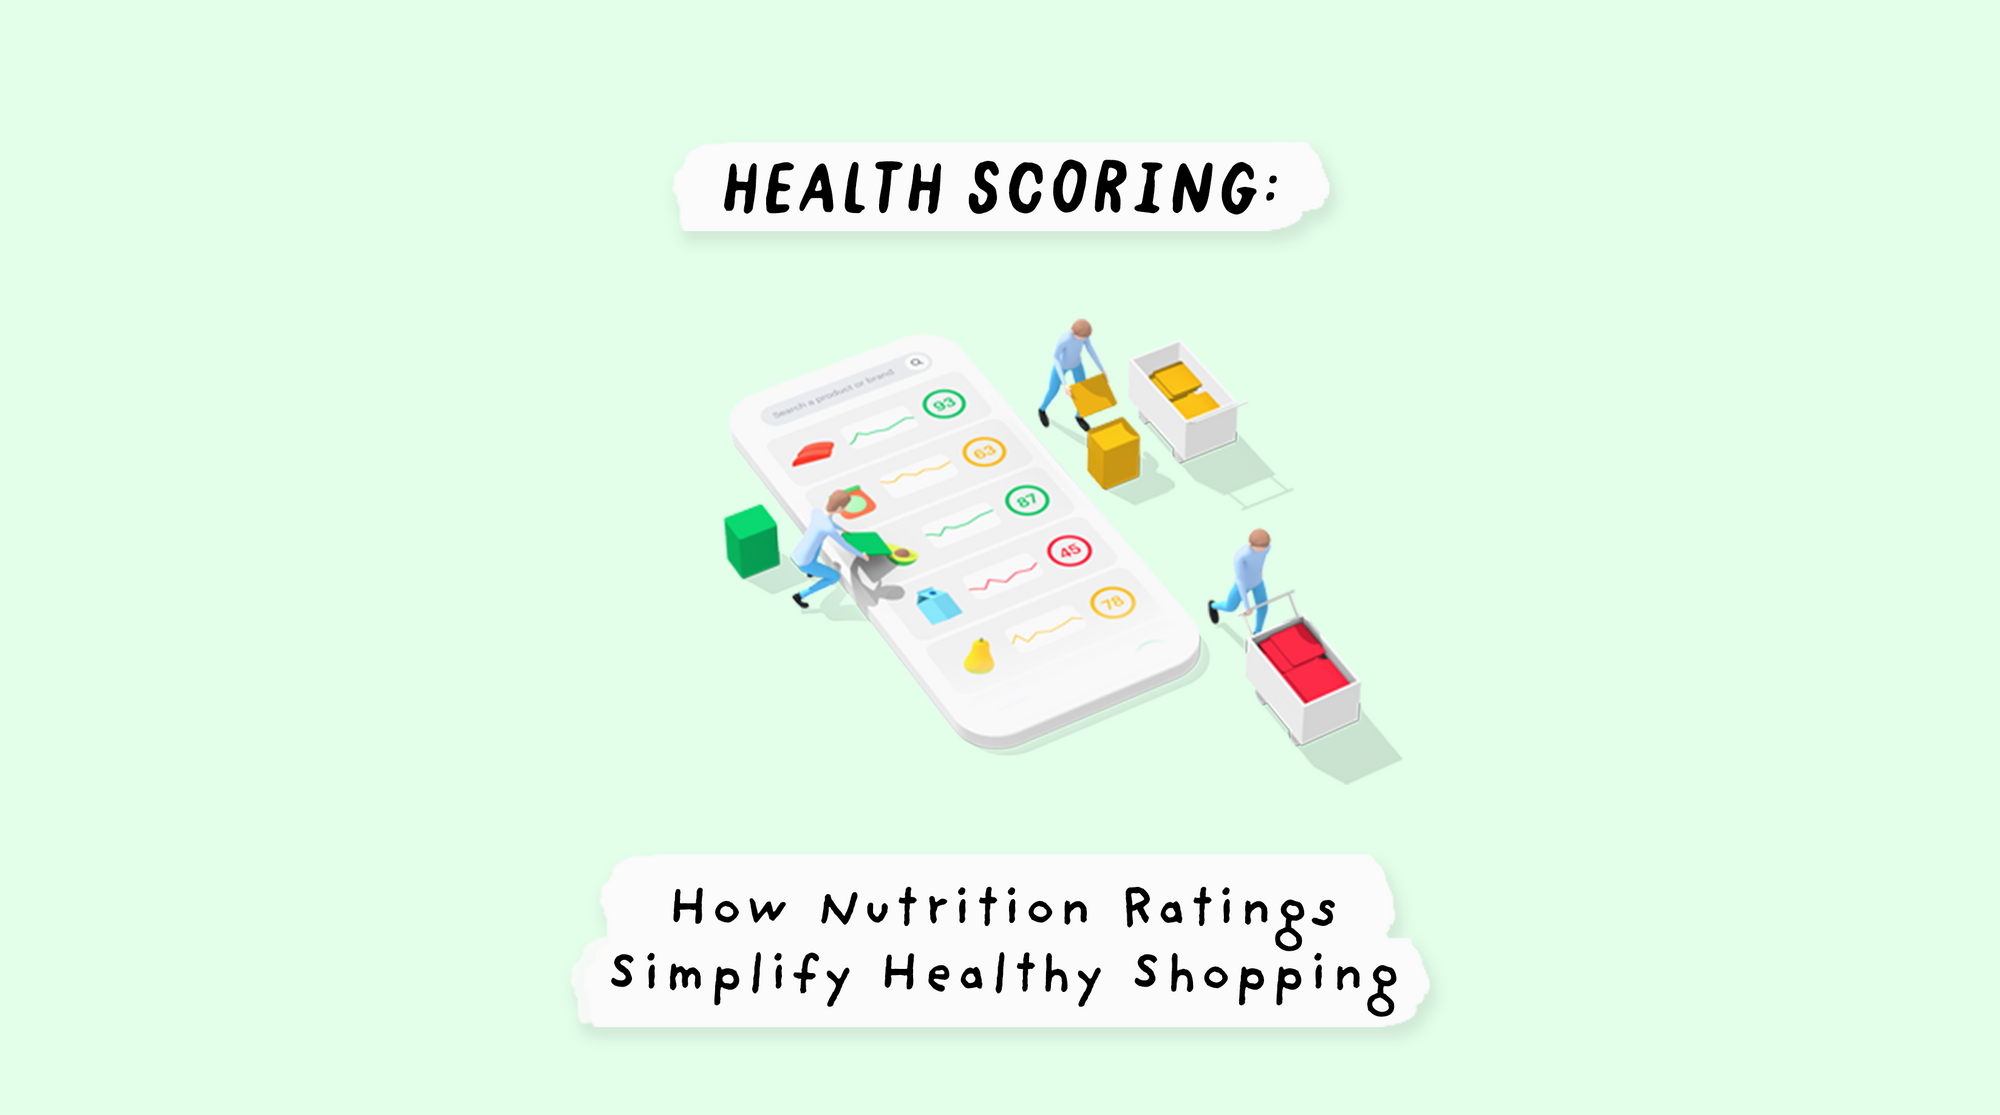 Health Scoring: How Nutrition Ratings Simplify Healthy Shopping